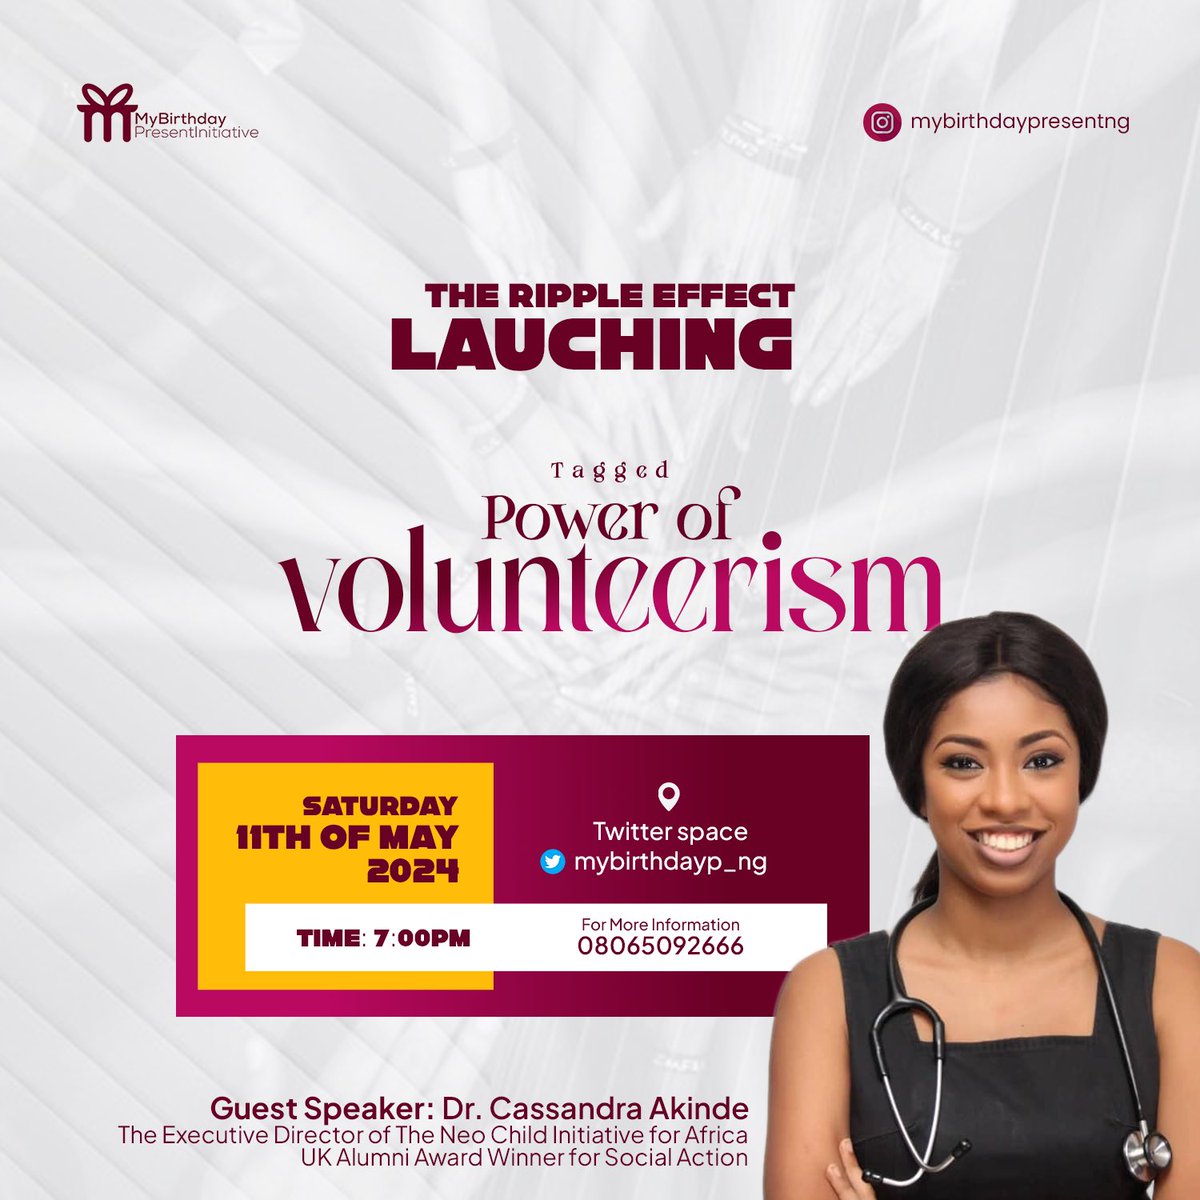 It’s happening tomorrow 💃💃💃
Join us on the space @mybirthdayp_ng and let’s talk about The power of Volunteerism. 
Click on this link to register 
docs.google.com/forms/d/e/1FAI…